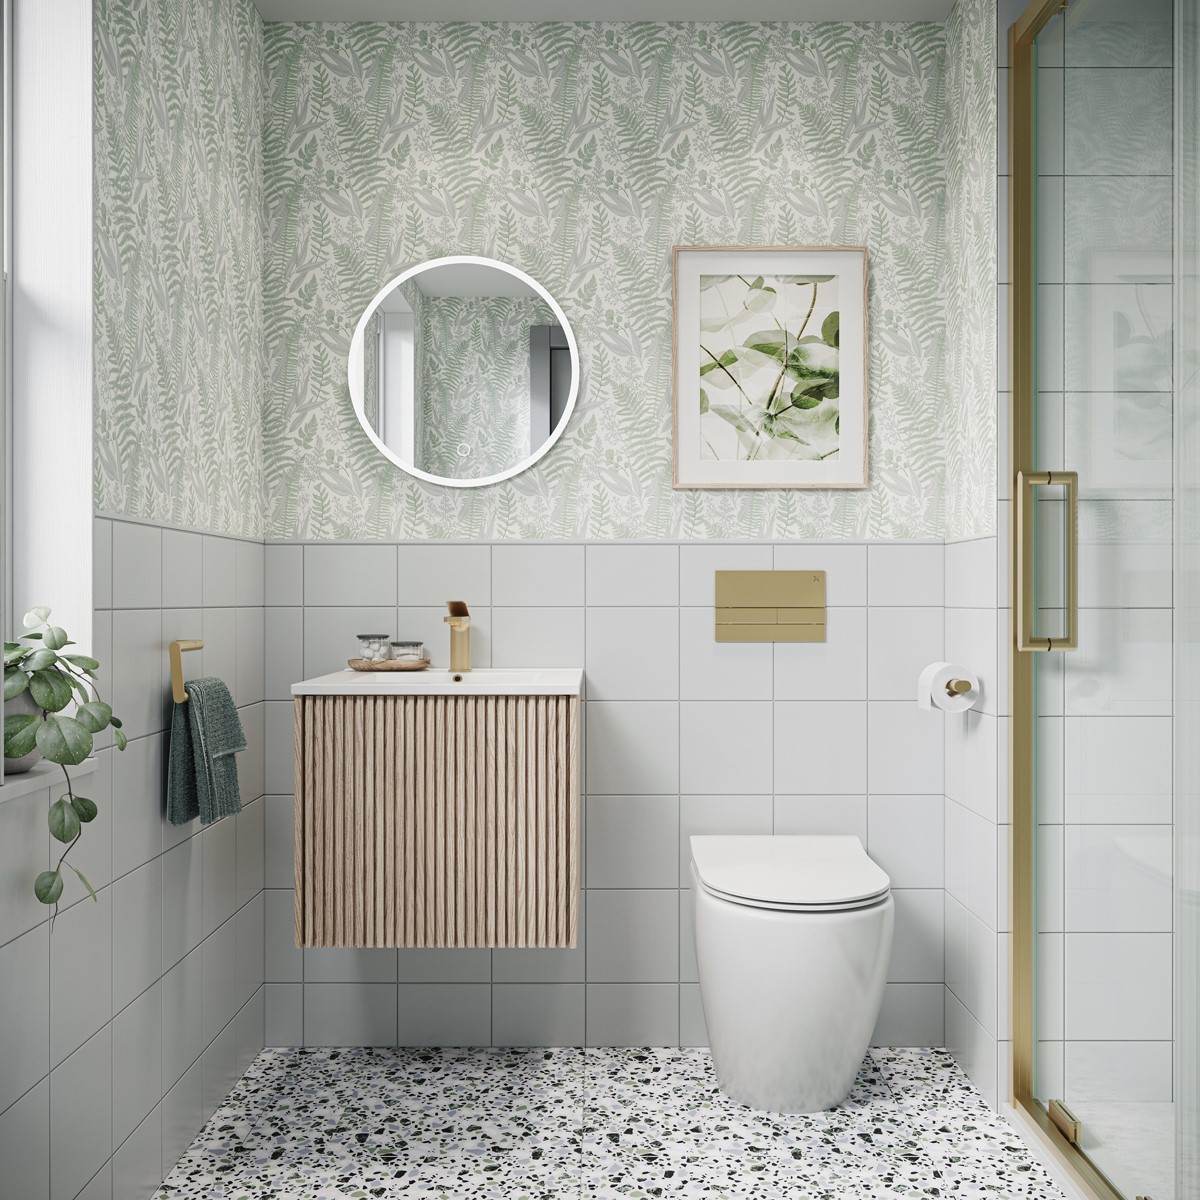 Small bathroom design | Discover stylish bathroom ideas for your small space with Crosswater